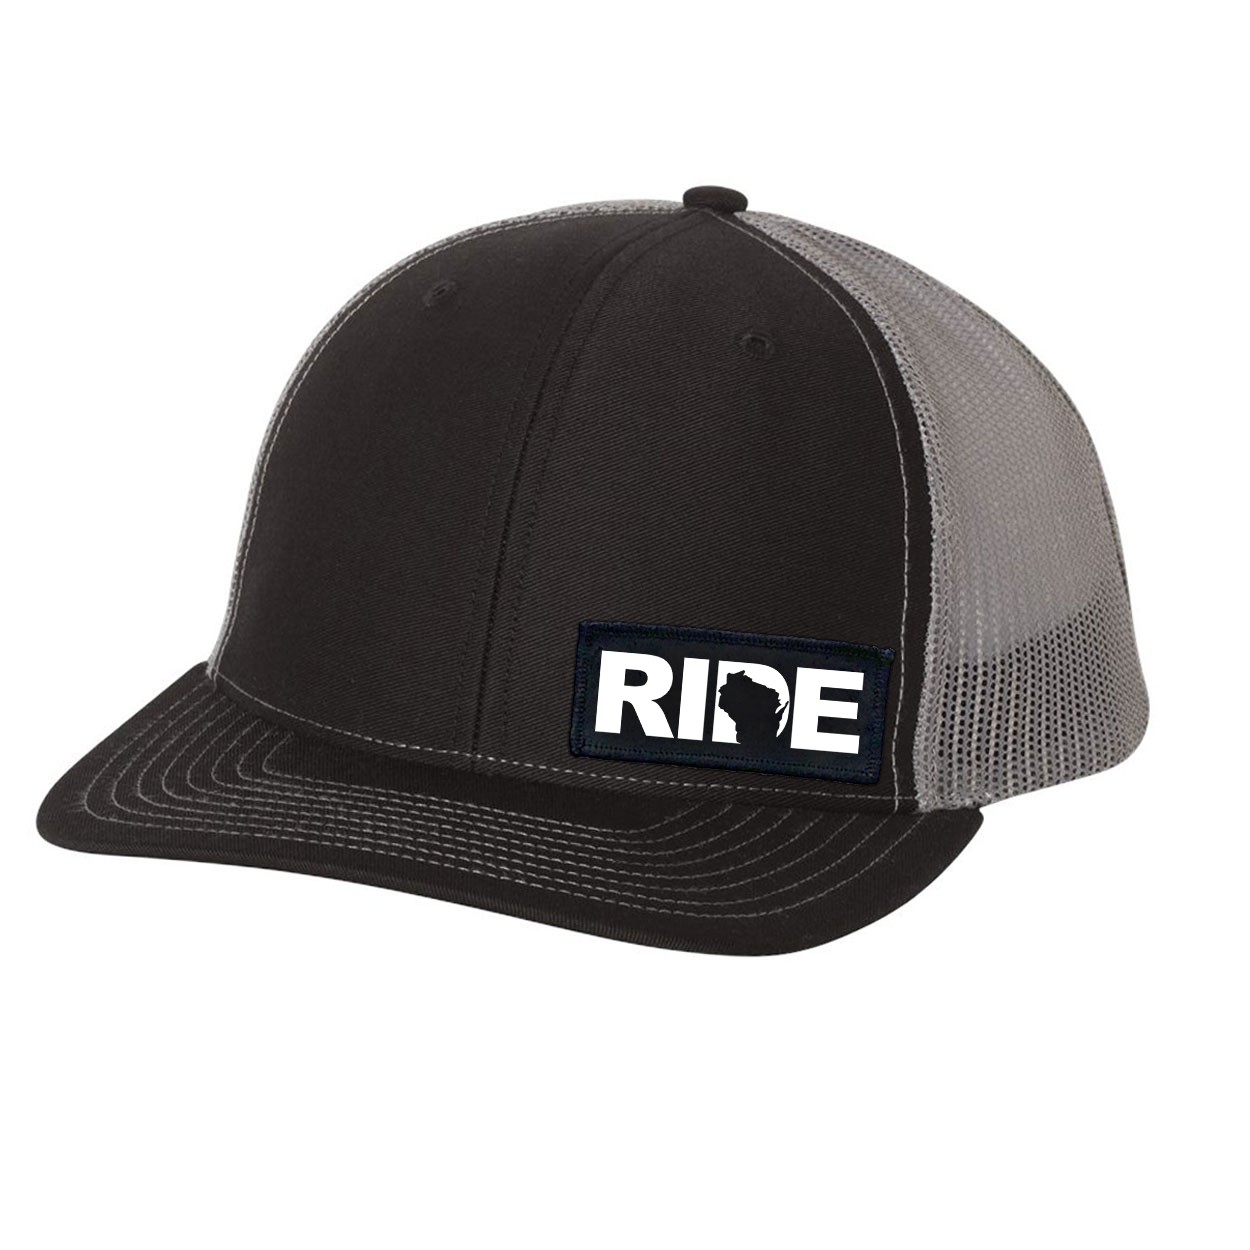 Ride Wisconsin Night Out Woven Patch Snapback Trucker Hat Black/Gray (White Logo)